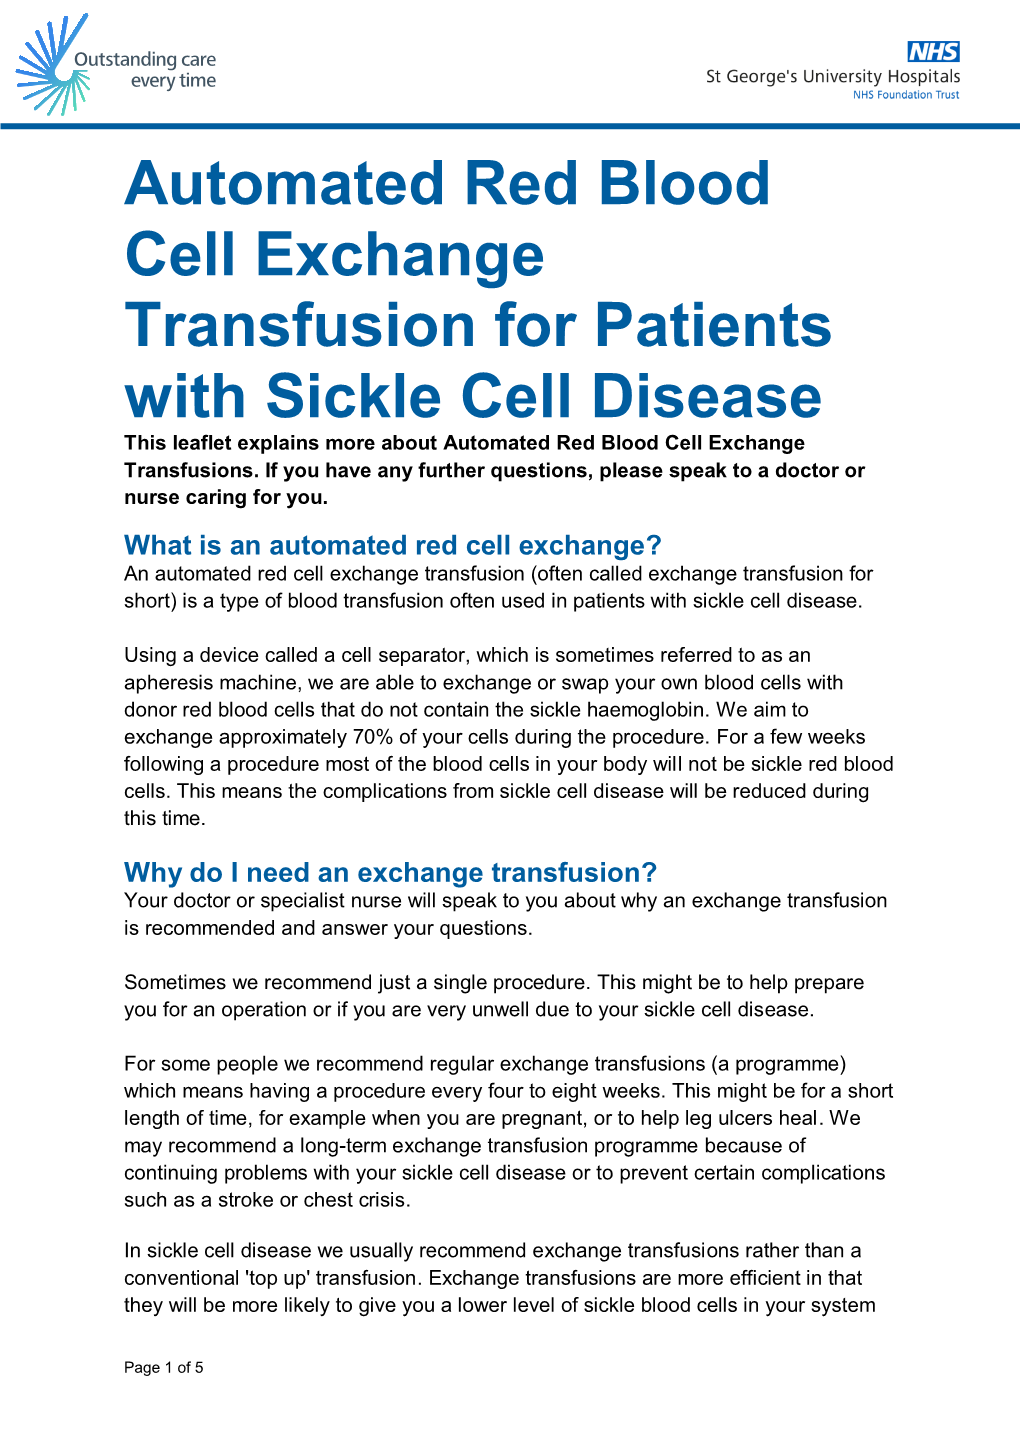 Automated Red Blood Cell Exchange Transfusion for Patients with Sickle Cell Disease This Leaflet Explains More About Automated Red Blood Cell Exchange Transfusions